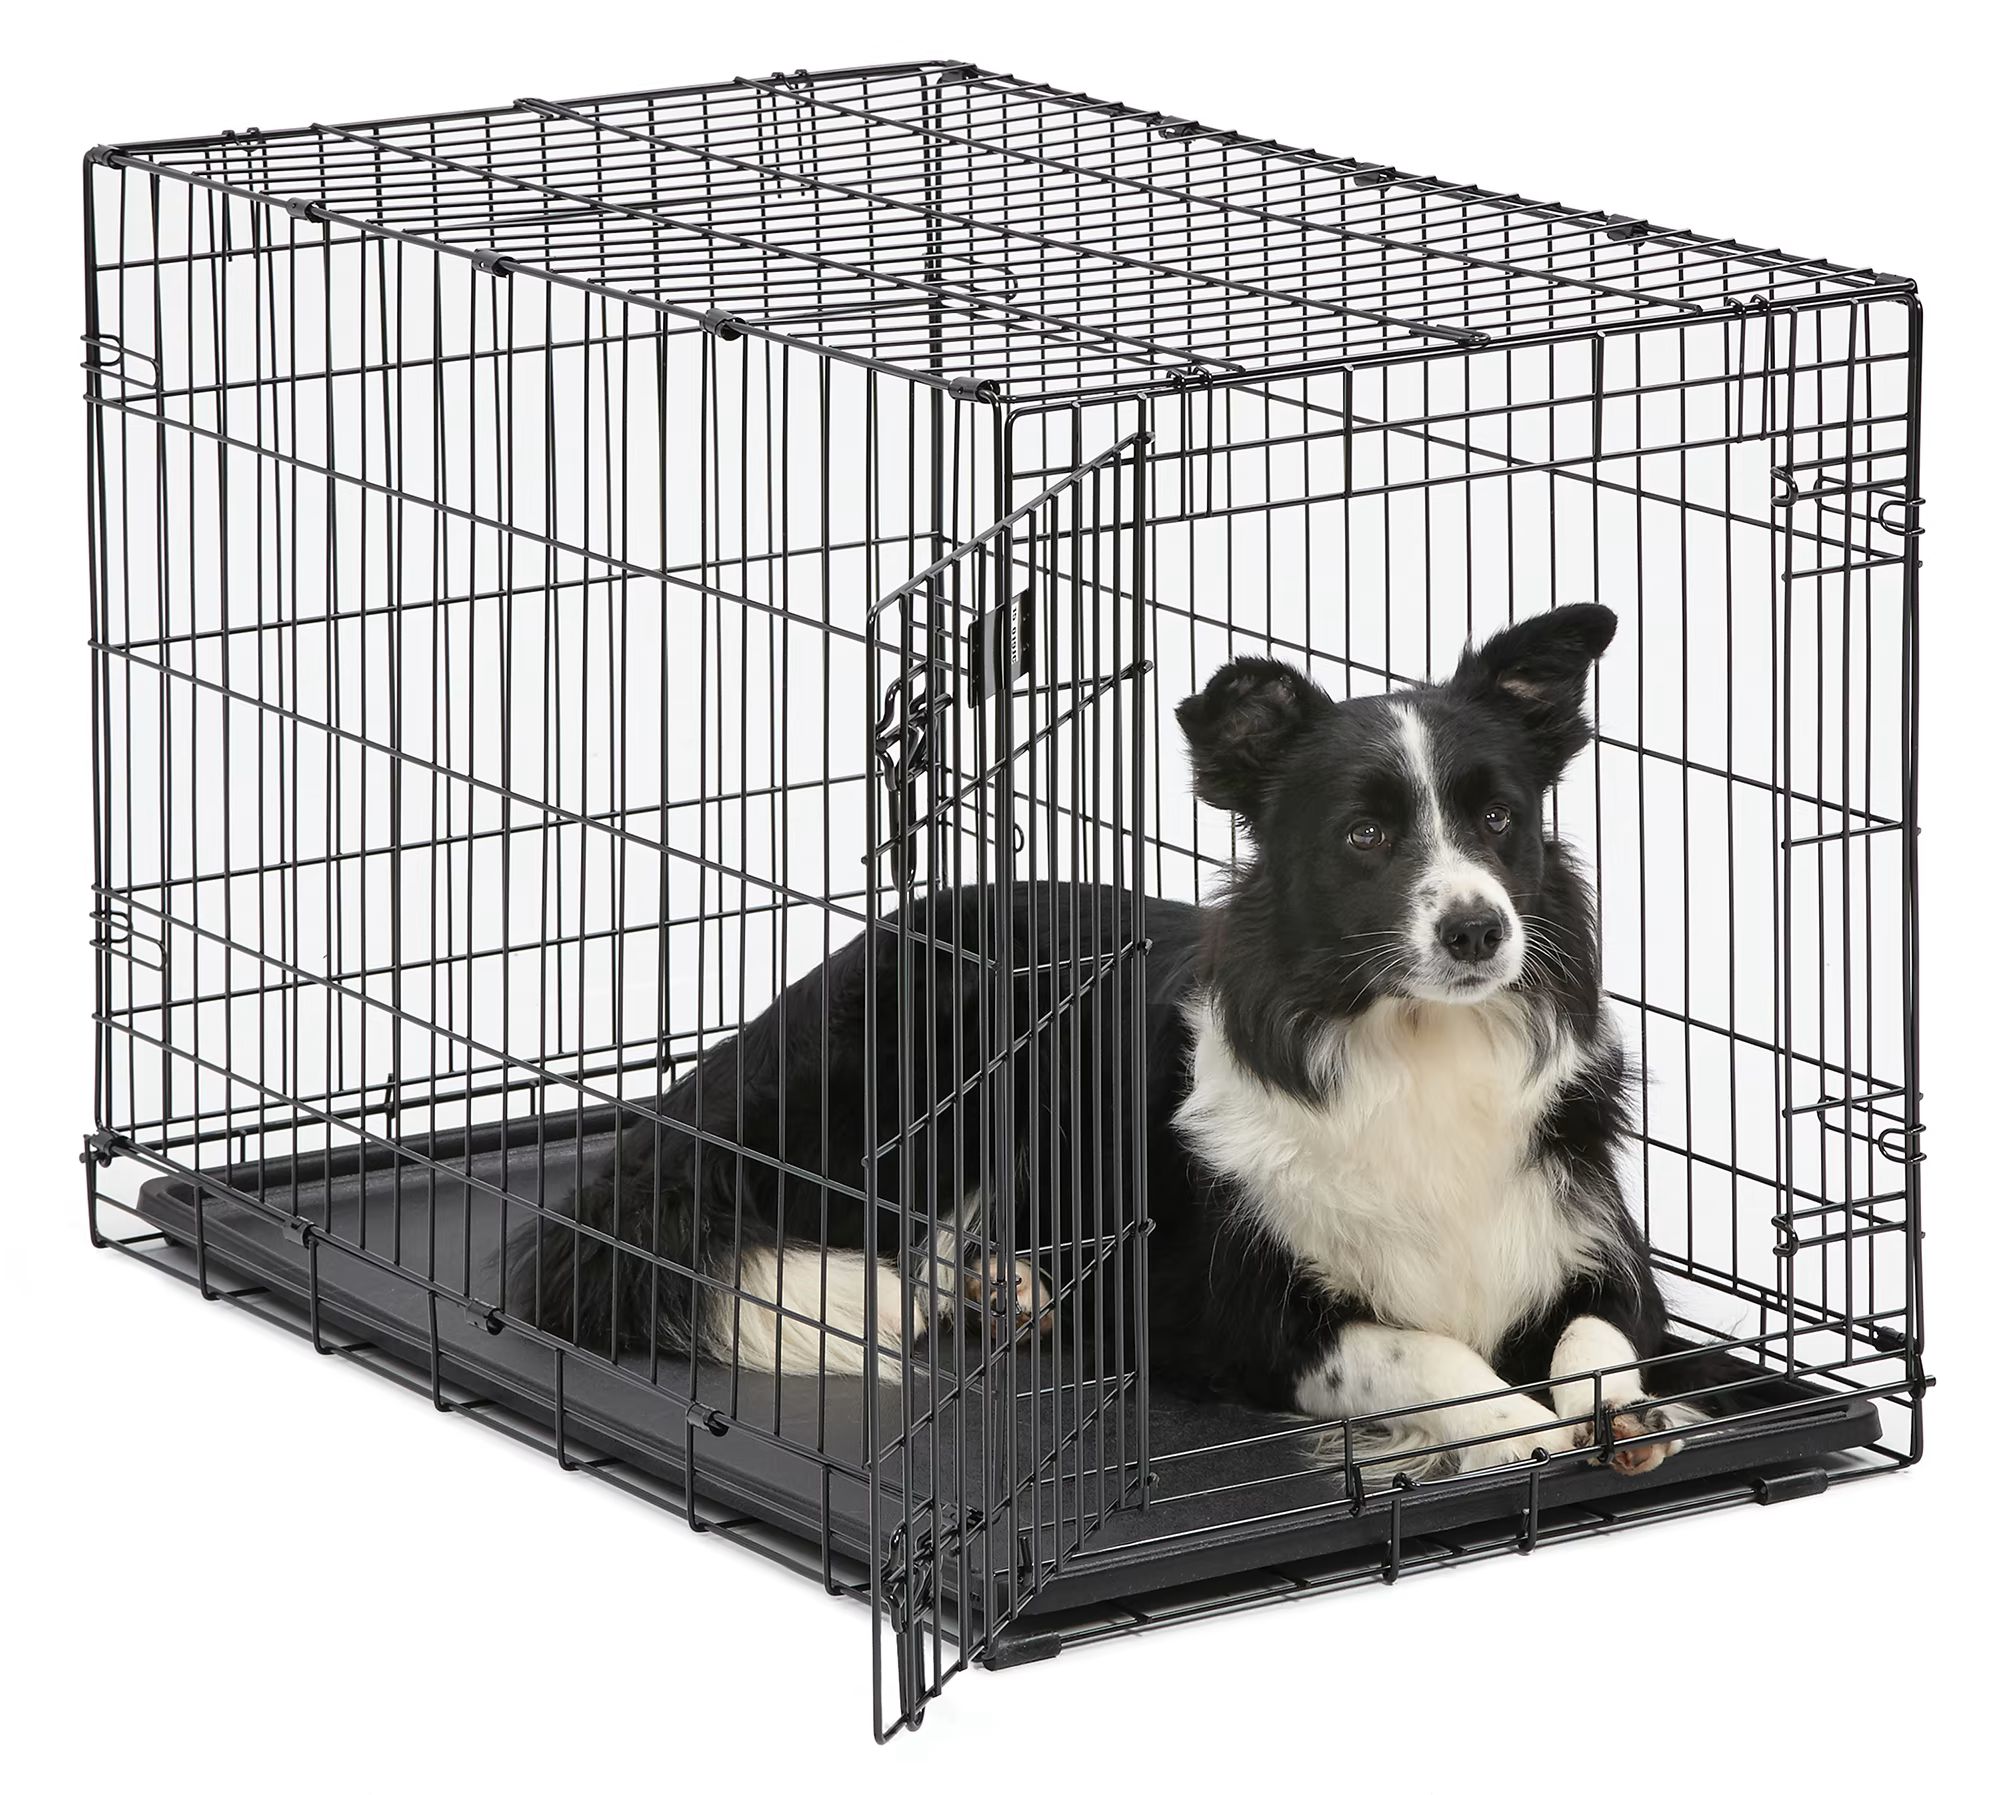 Midwest iCrate Single Door Folding Dog Crate, 30" L X 19" W X 21" H | Petco